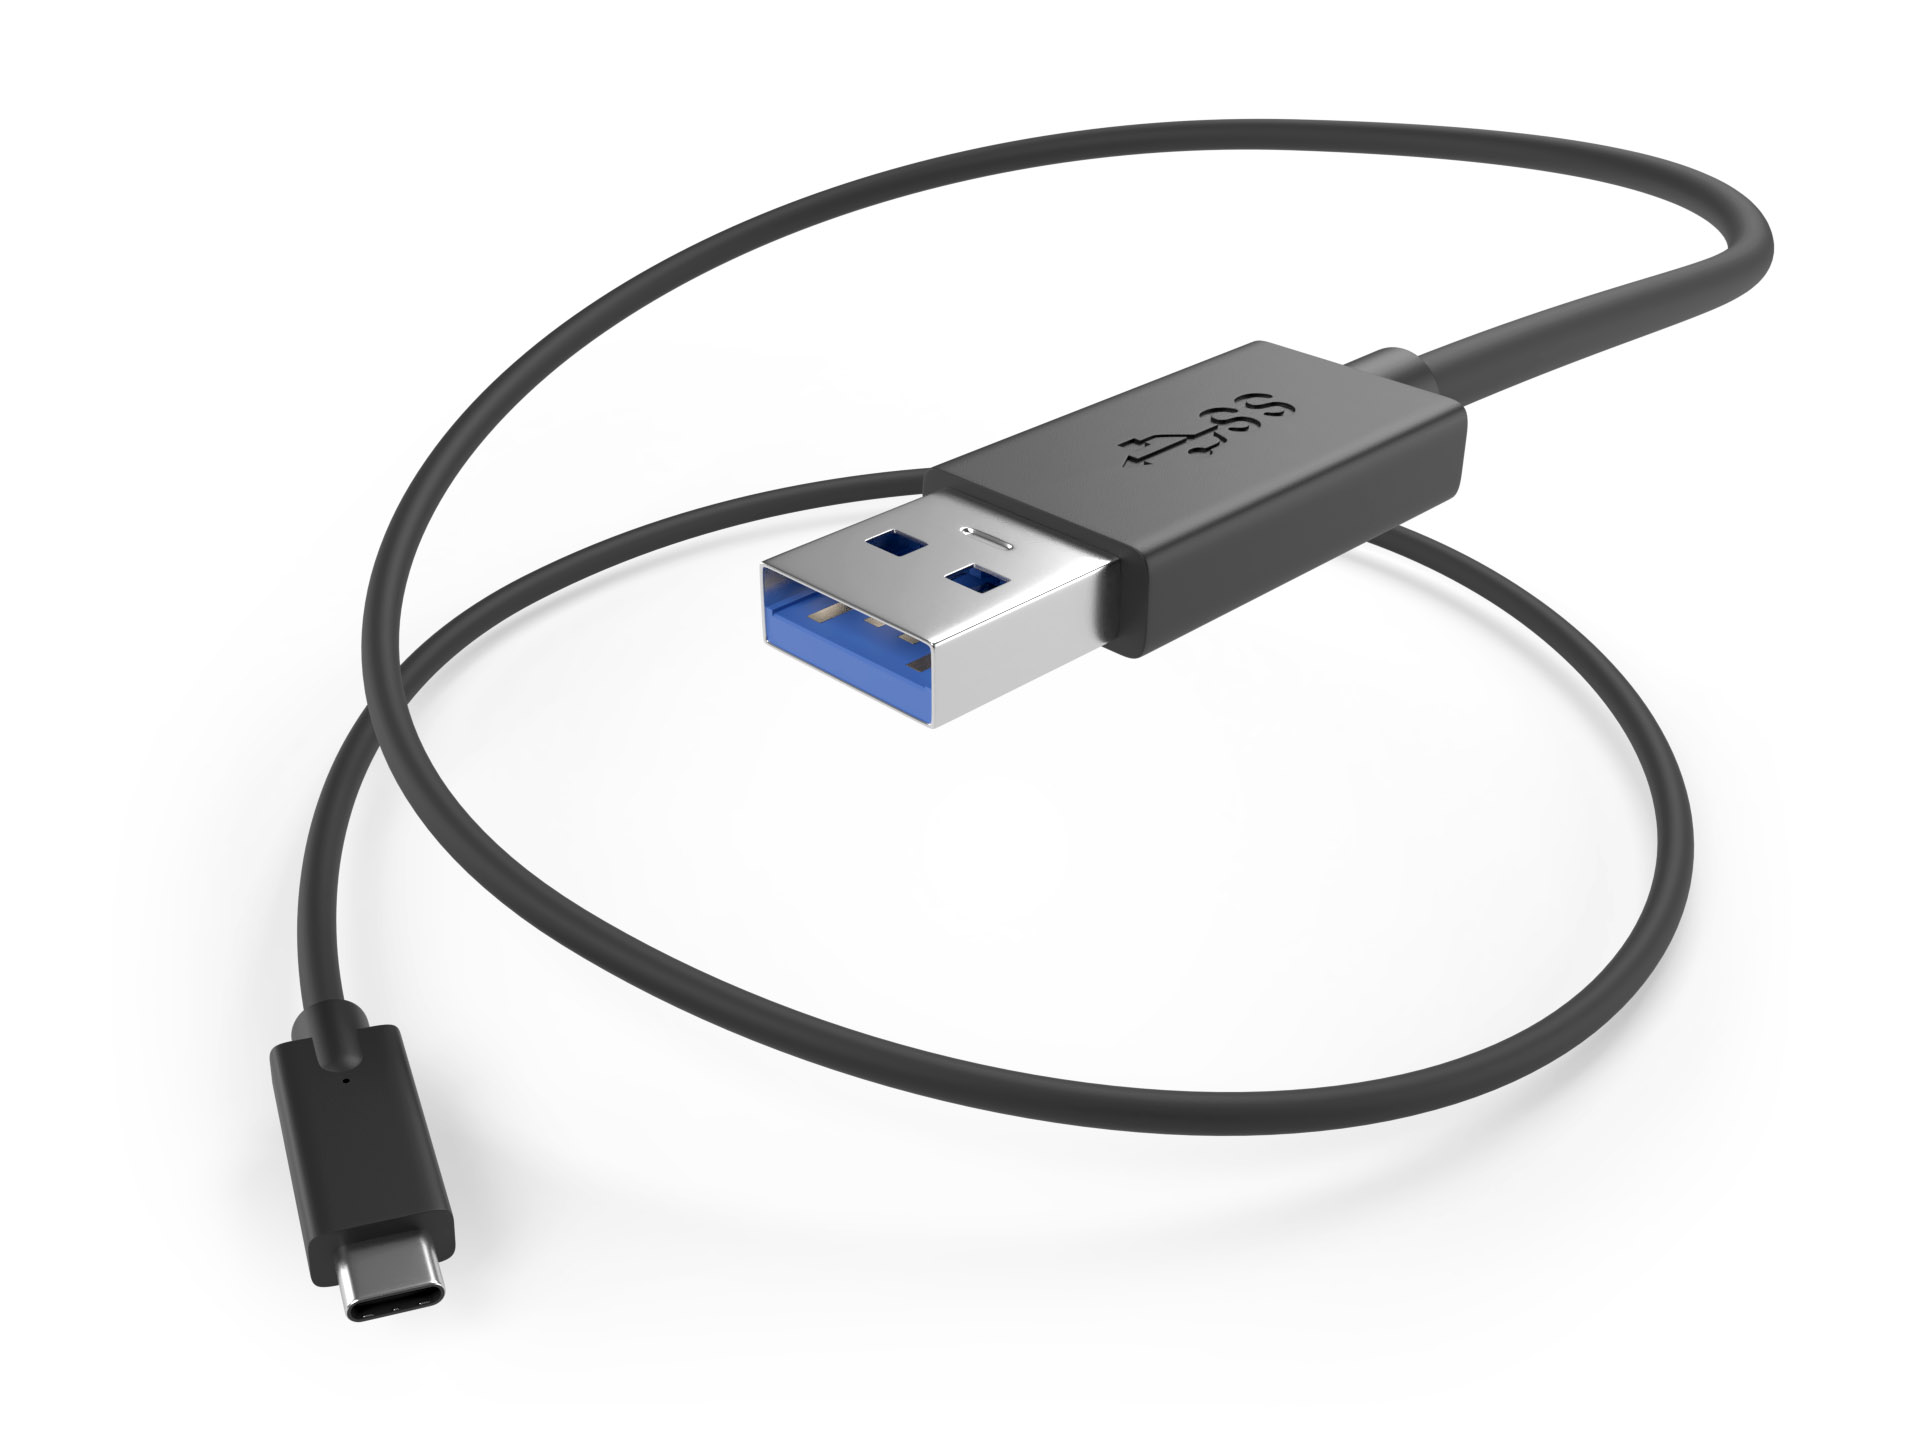 Cable USB Type C a MICRO USB 3.0